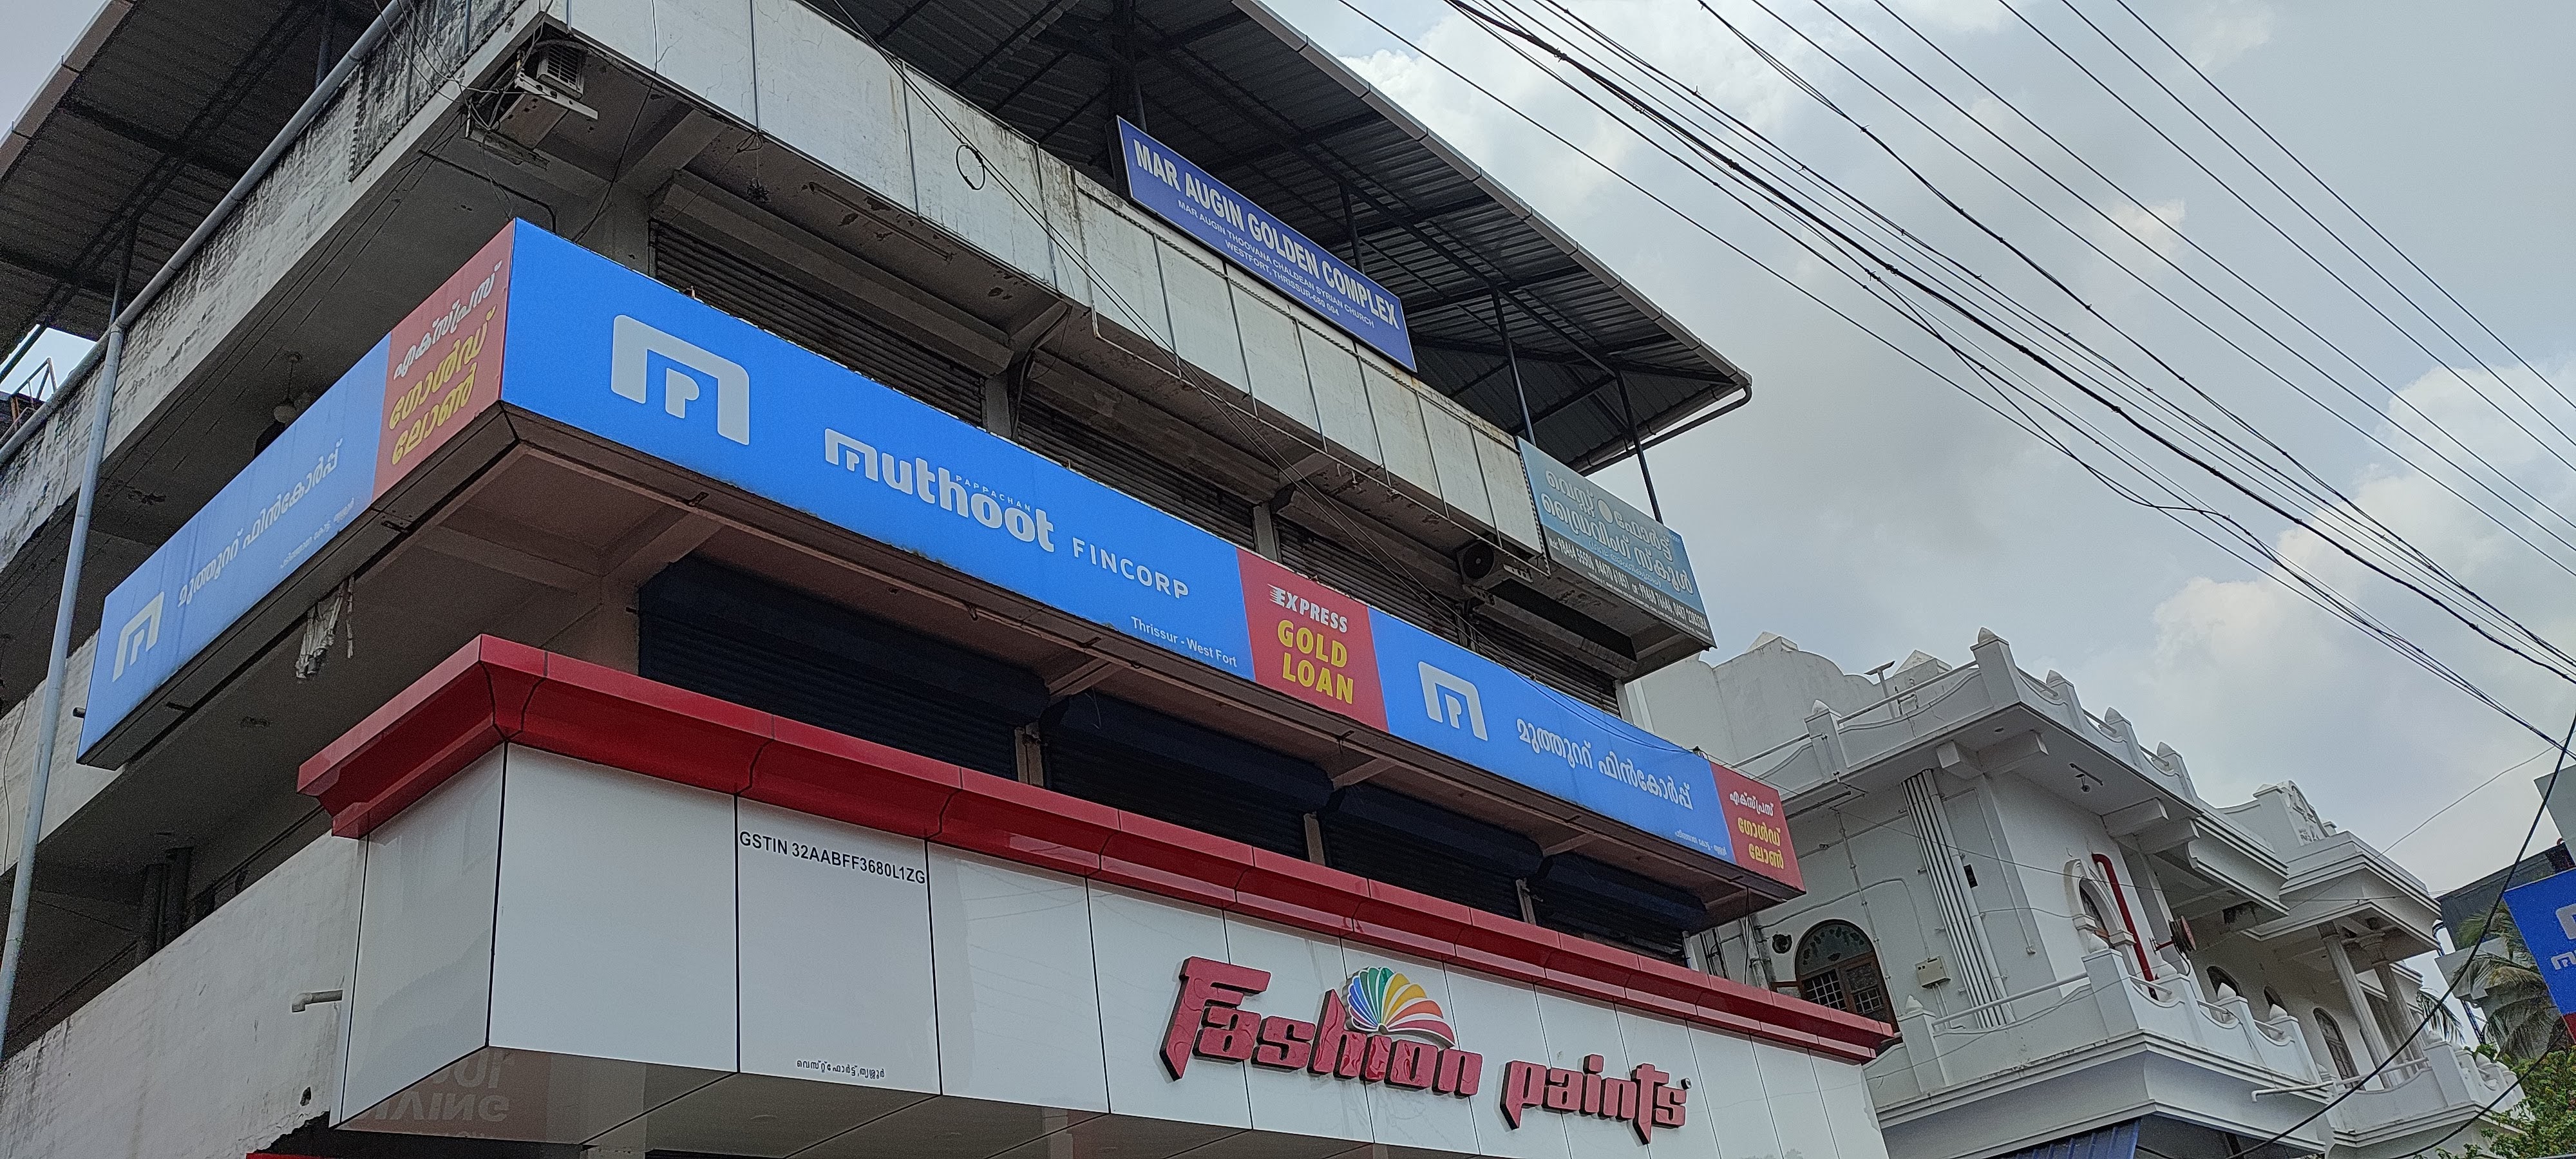 Photos and Videos of Muthoot Fincorp Gold Loan in Poothole, Thrissur